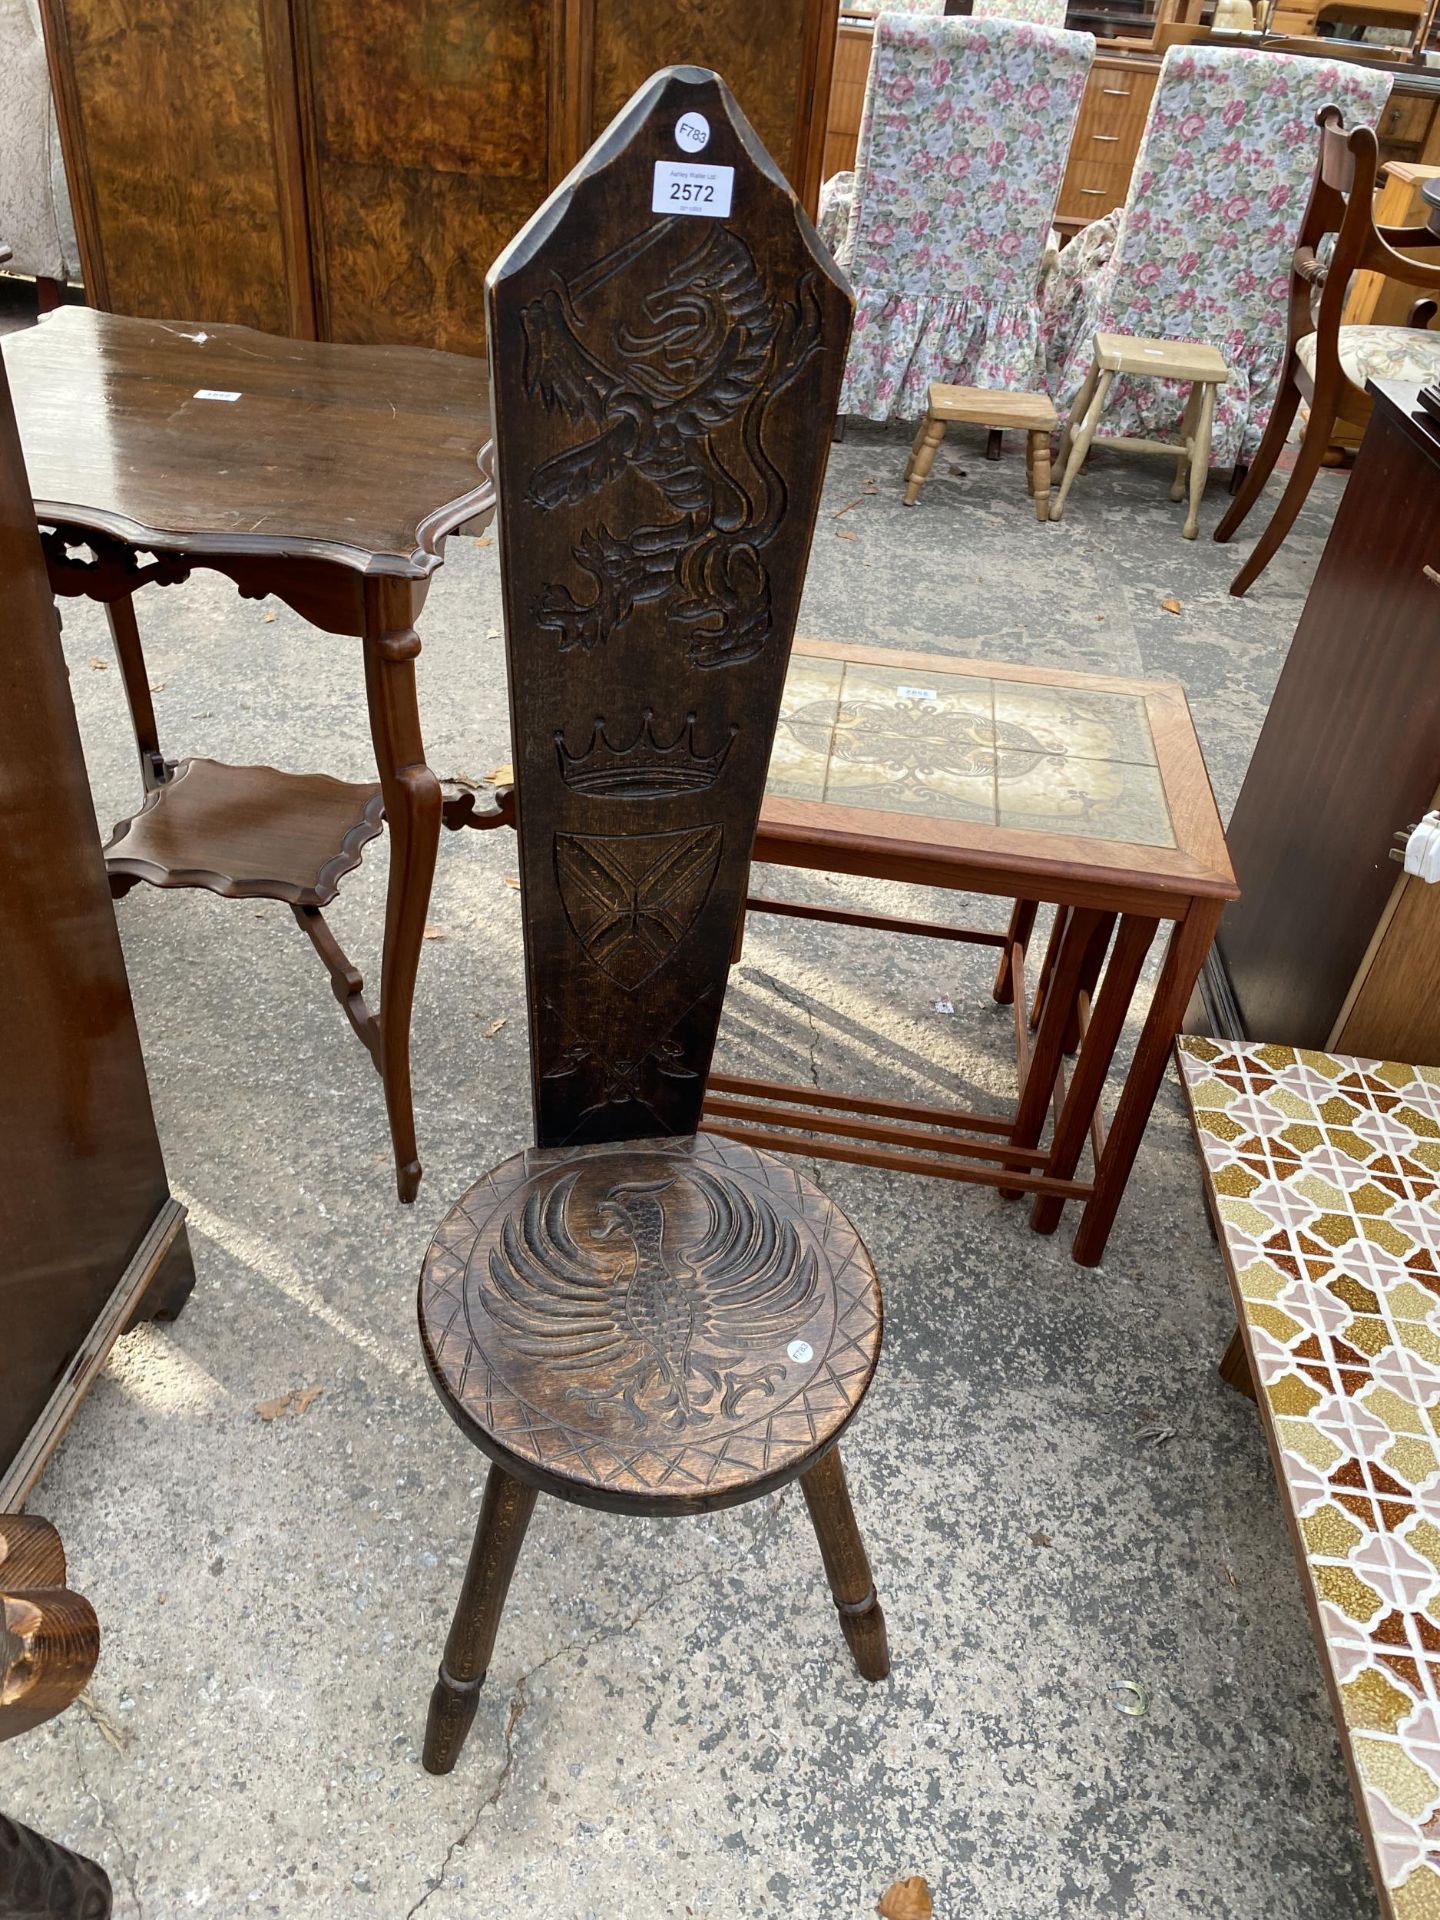 A CARVED BEECH SPINNING STOOL, CARVED BY HAND THE STUDIO OF ART AND ANTIQUITY, TORQUAY, DEVON